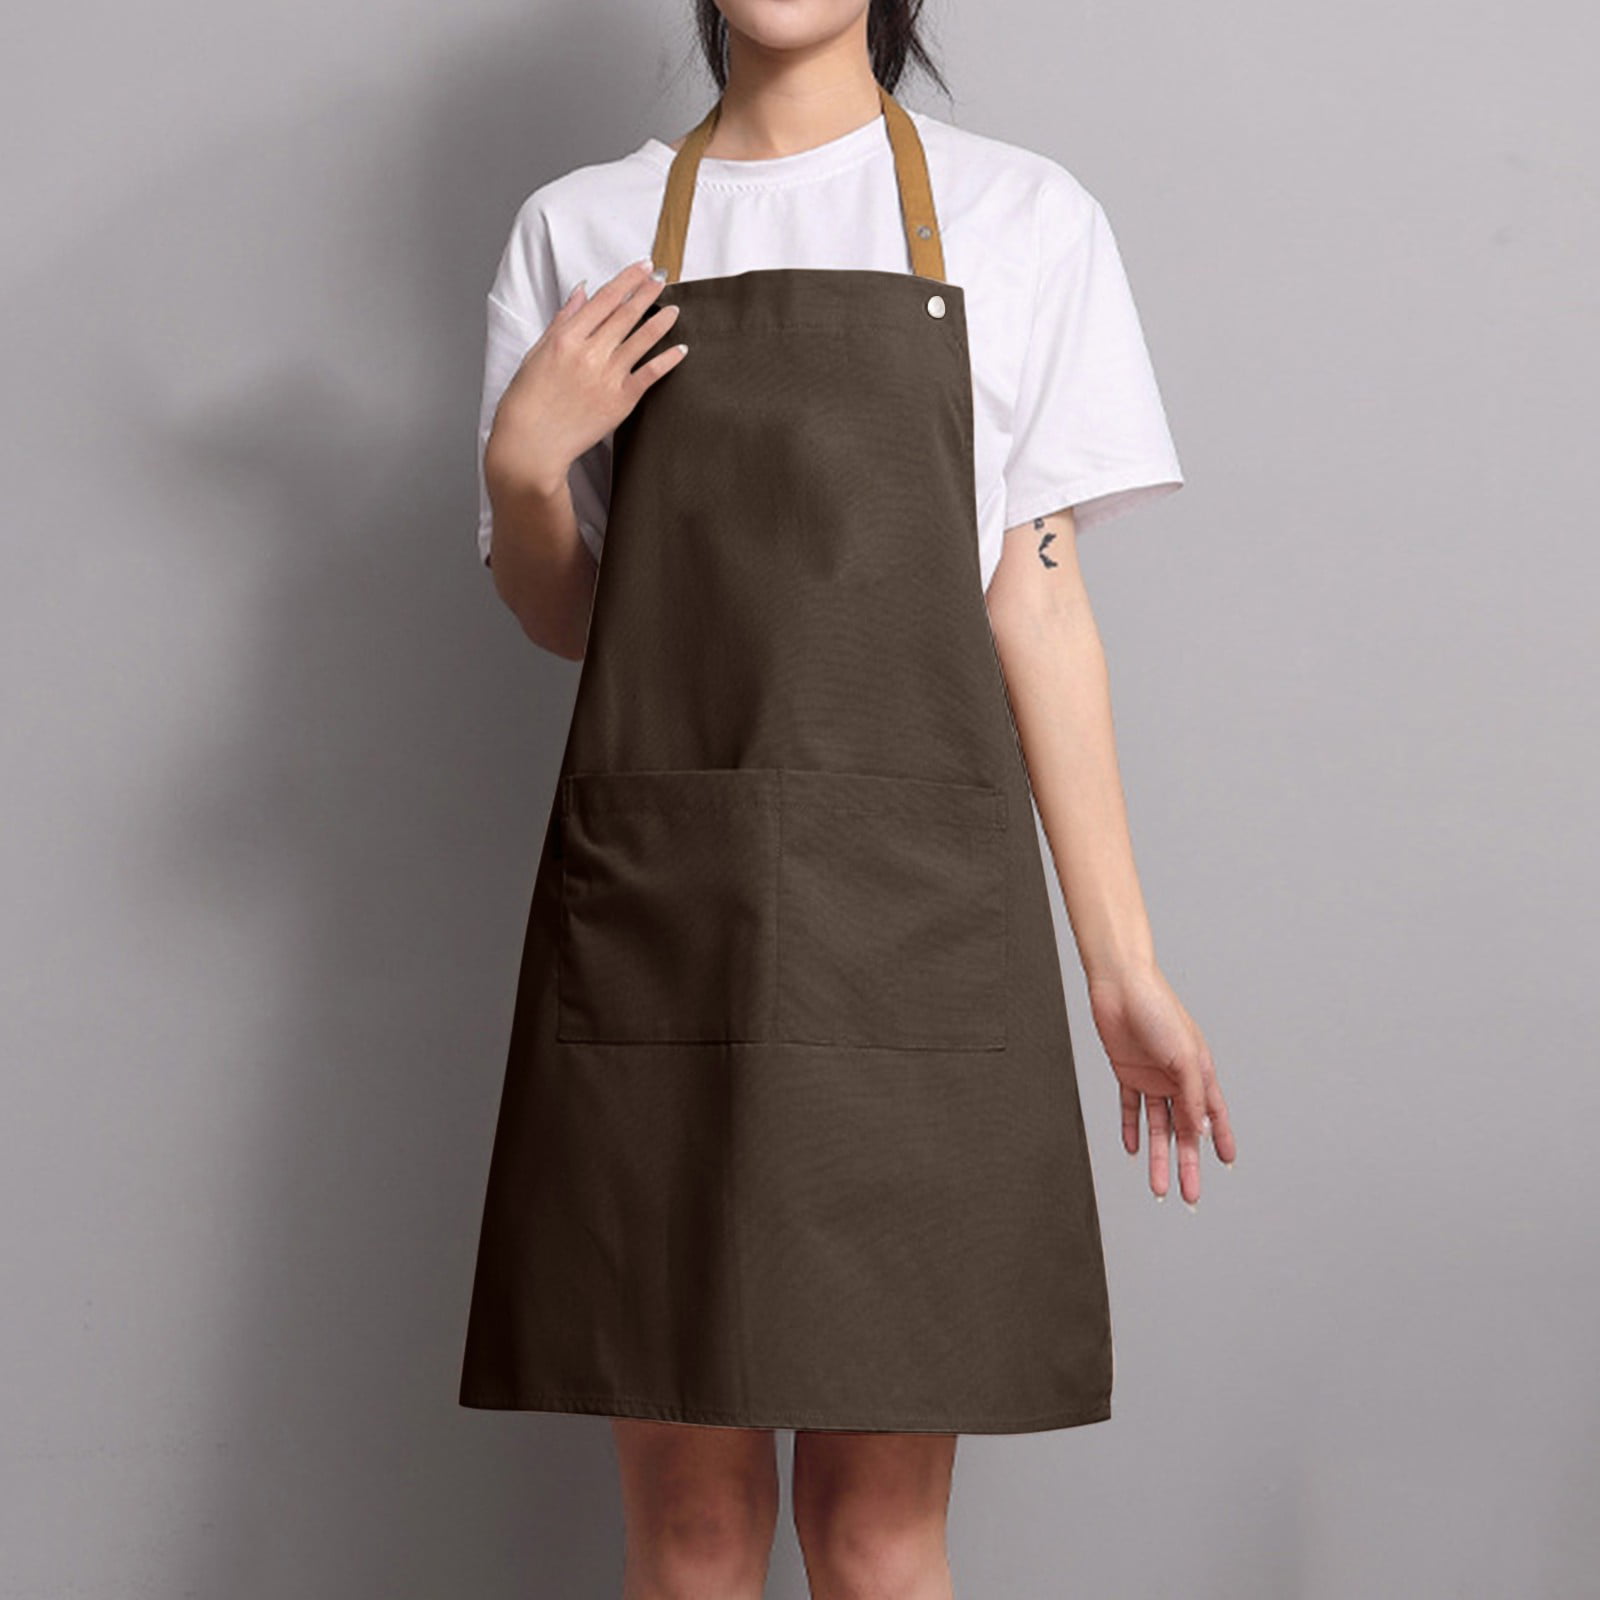 Professional Korean Style Apron With Nail Bibs For Women Ideal For  Waitresses, Restaurants, Coffee Shops, And Home Cooking Includes Stylish  Pinafore Design From Huaone, $5.82 | DHgate.Com